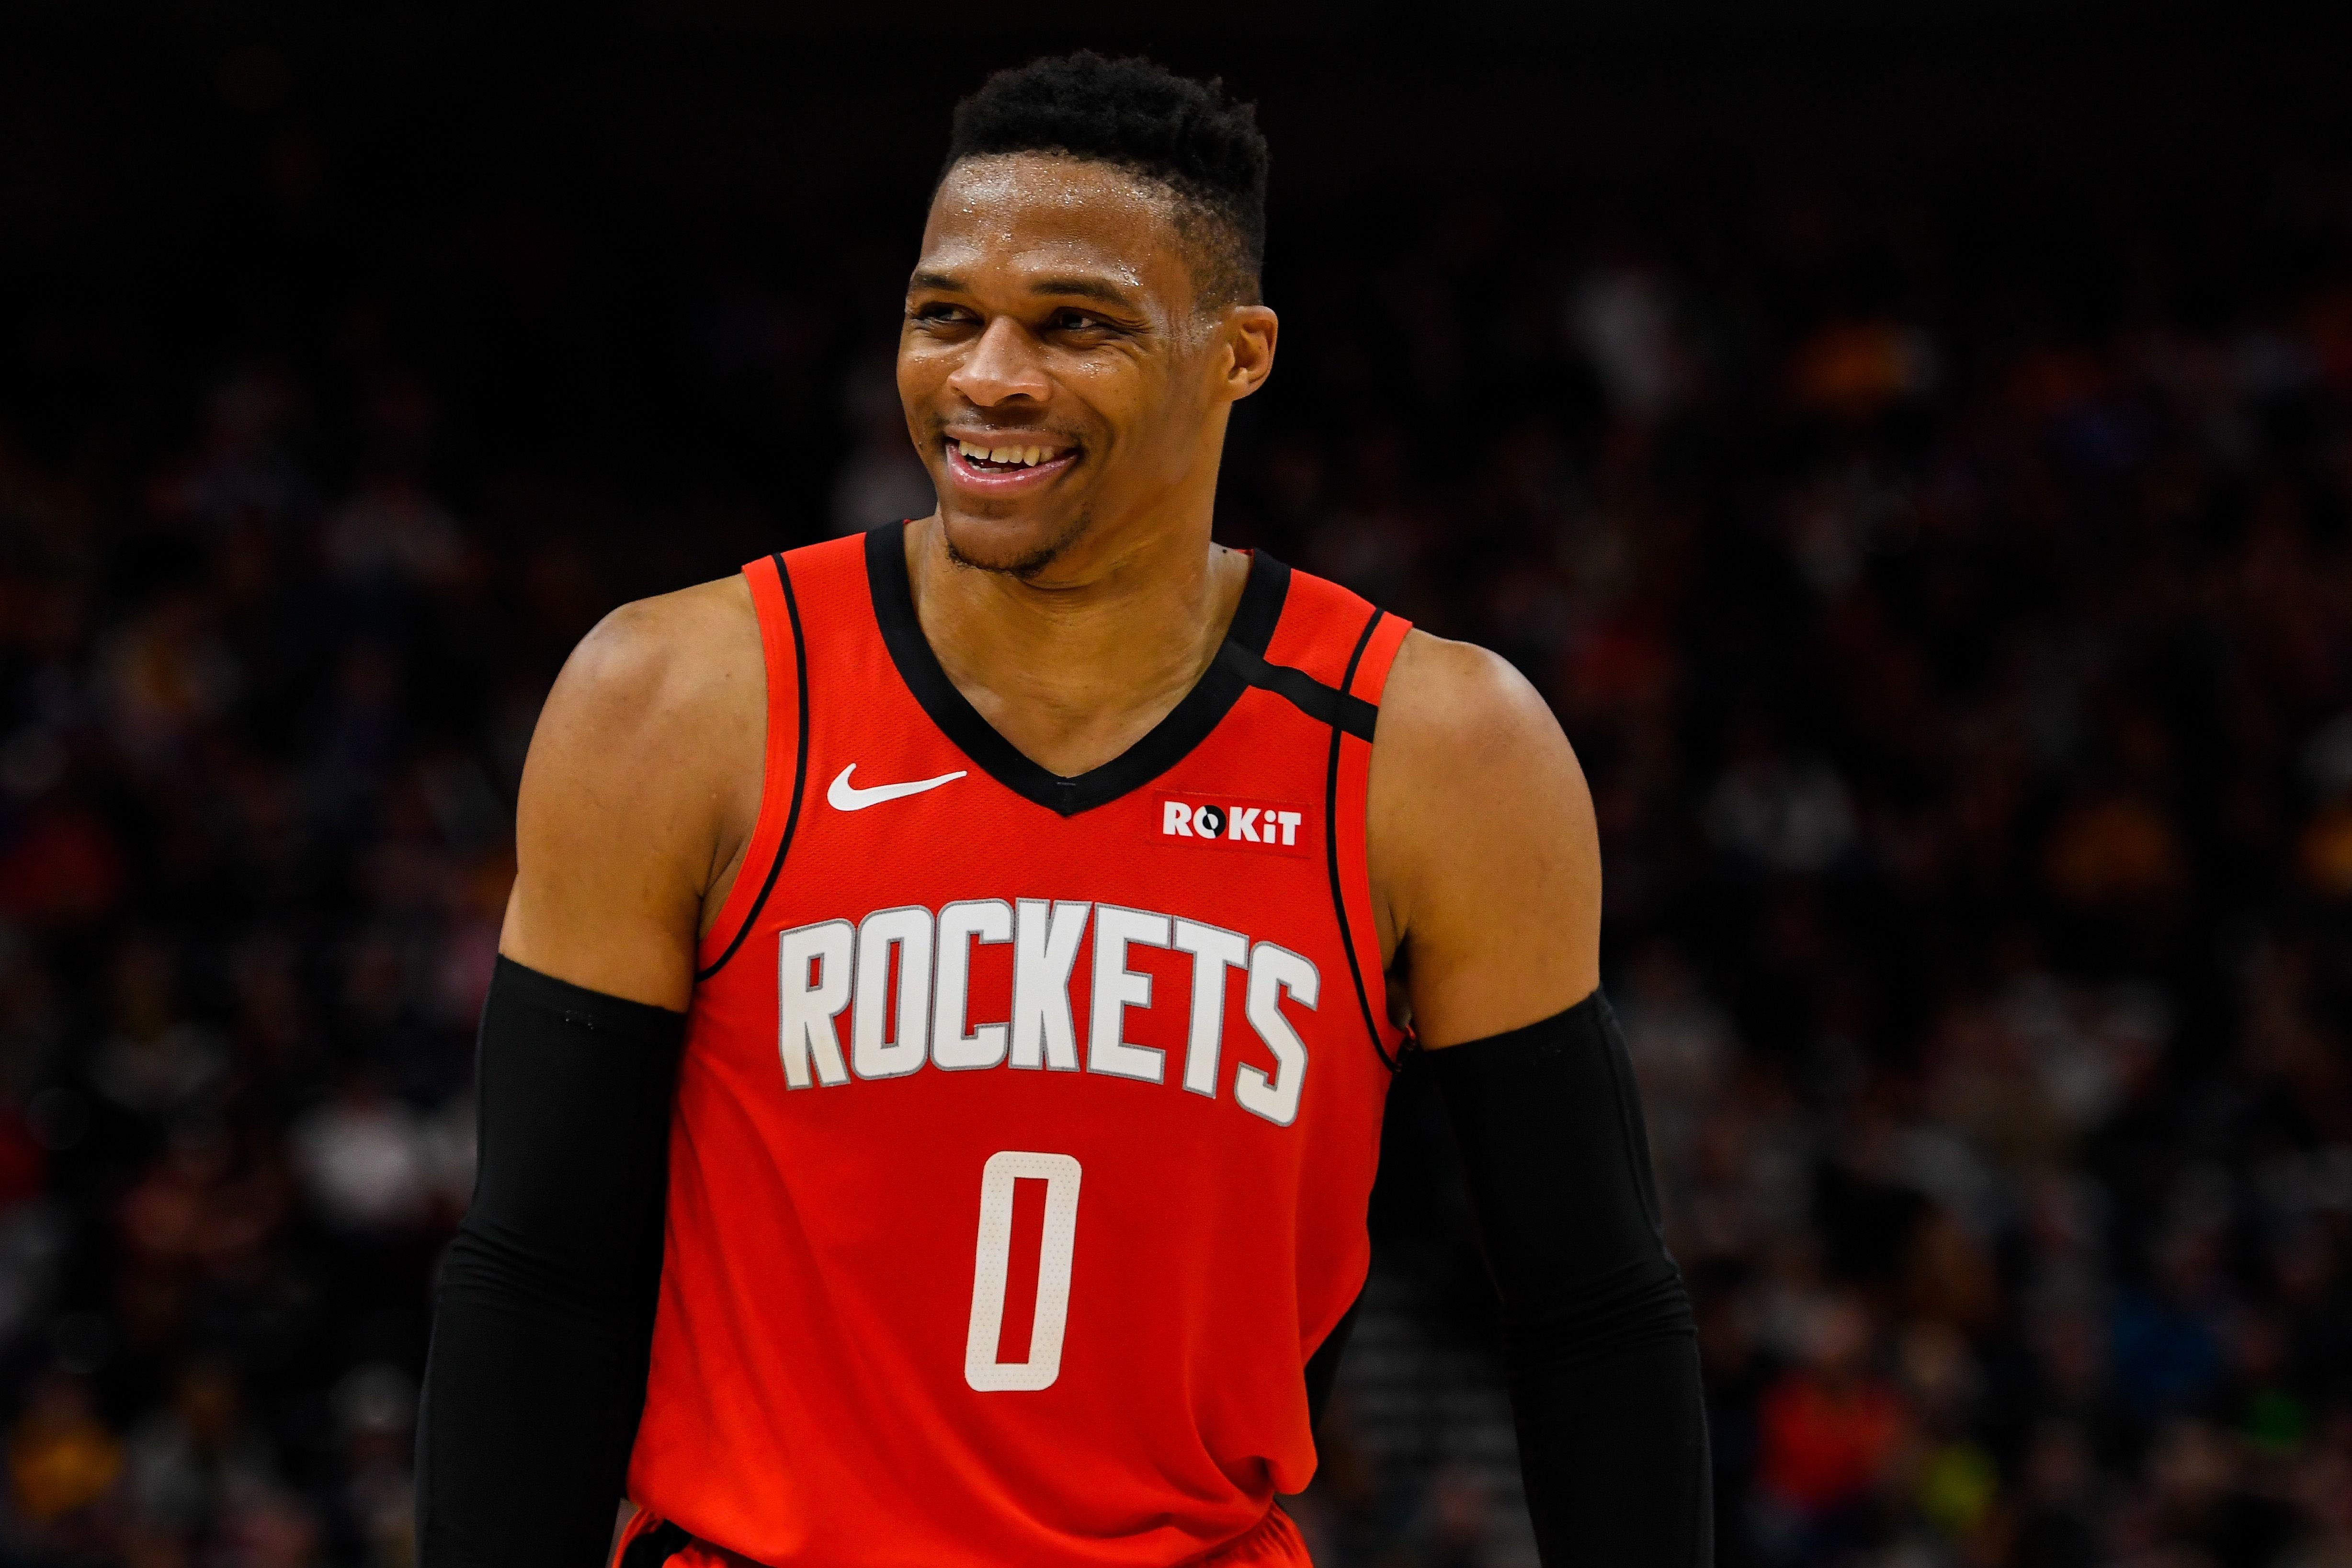 Russell Westbrook #0 of the Houston Rockets looks on during a game against the Utah Jazz at Vivint Smart Home Arena on February 22, 2020 in Salt Lake City, Utah. | Source: Getty Images